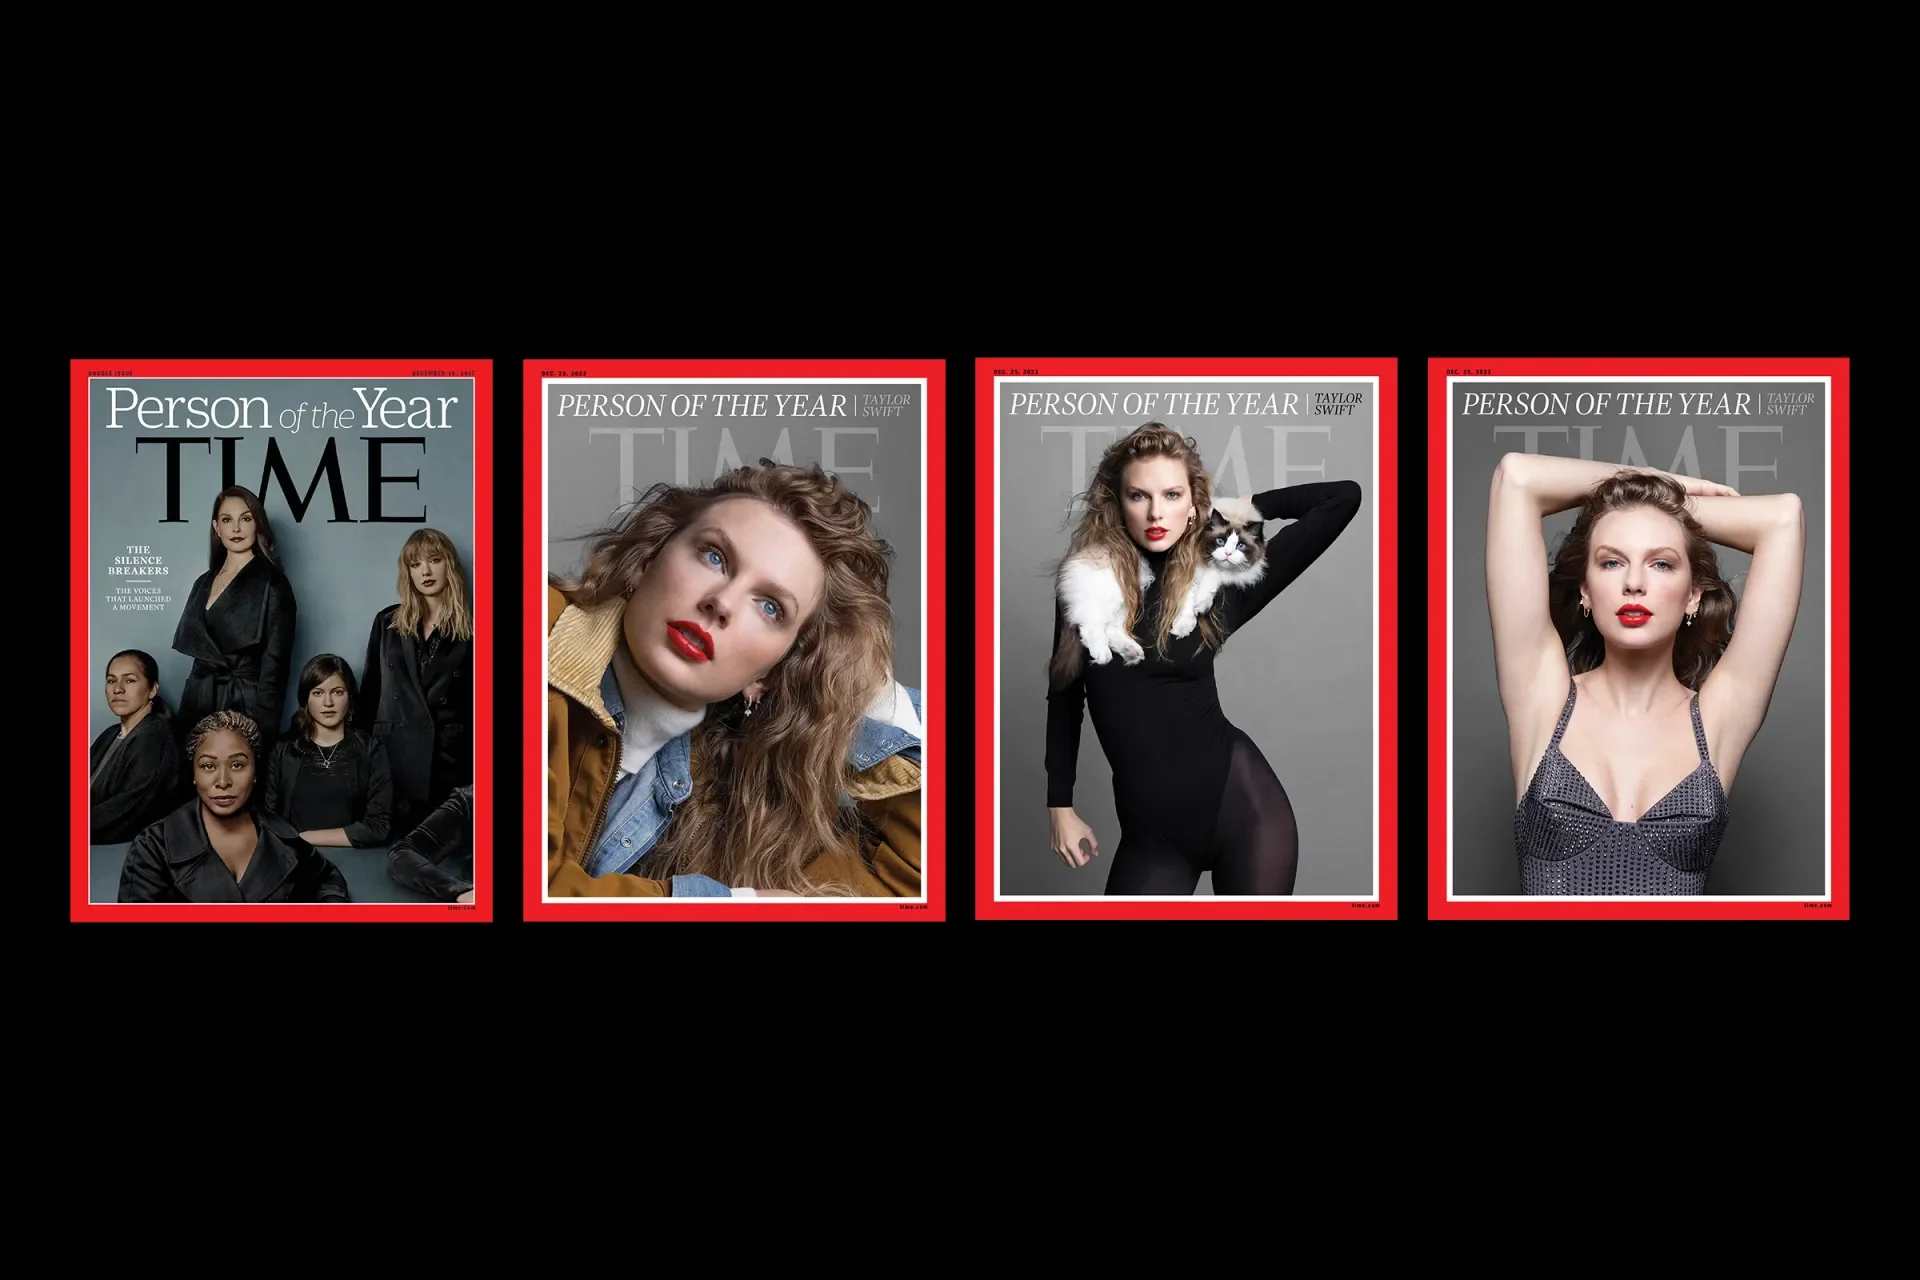 US pop star Taylor Swift named Time Magazine’s Person of the Year